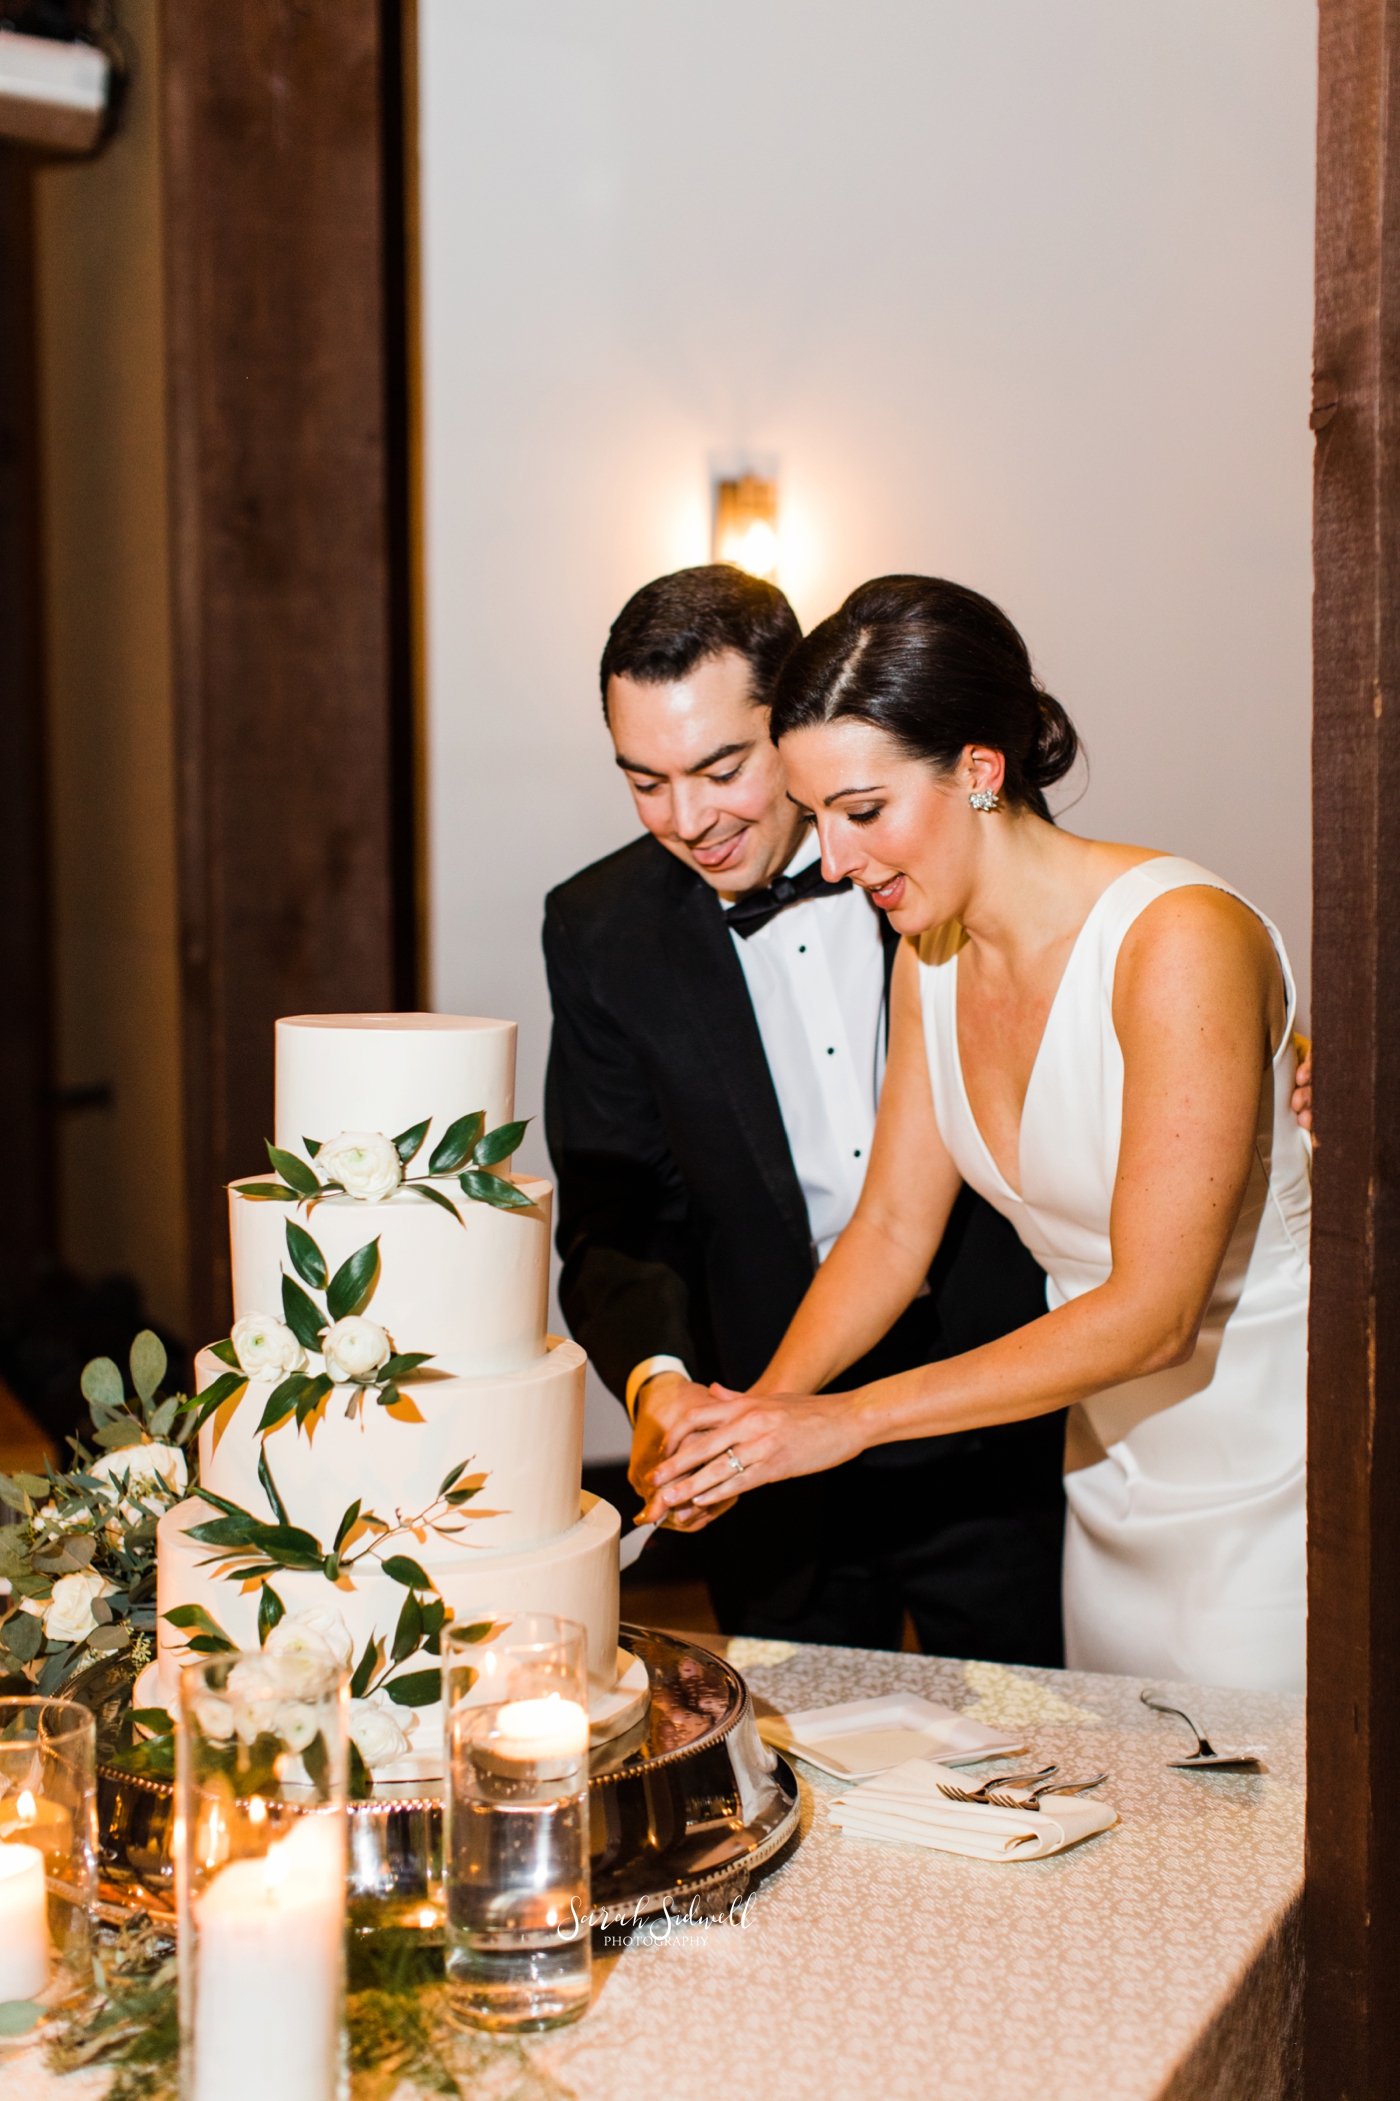 A bride and groom cut their wedding cake | Sarah Sidwell Photography | The Bell Tower